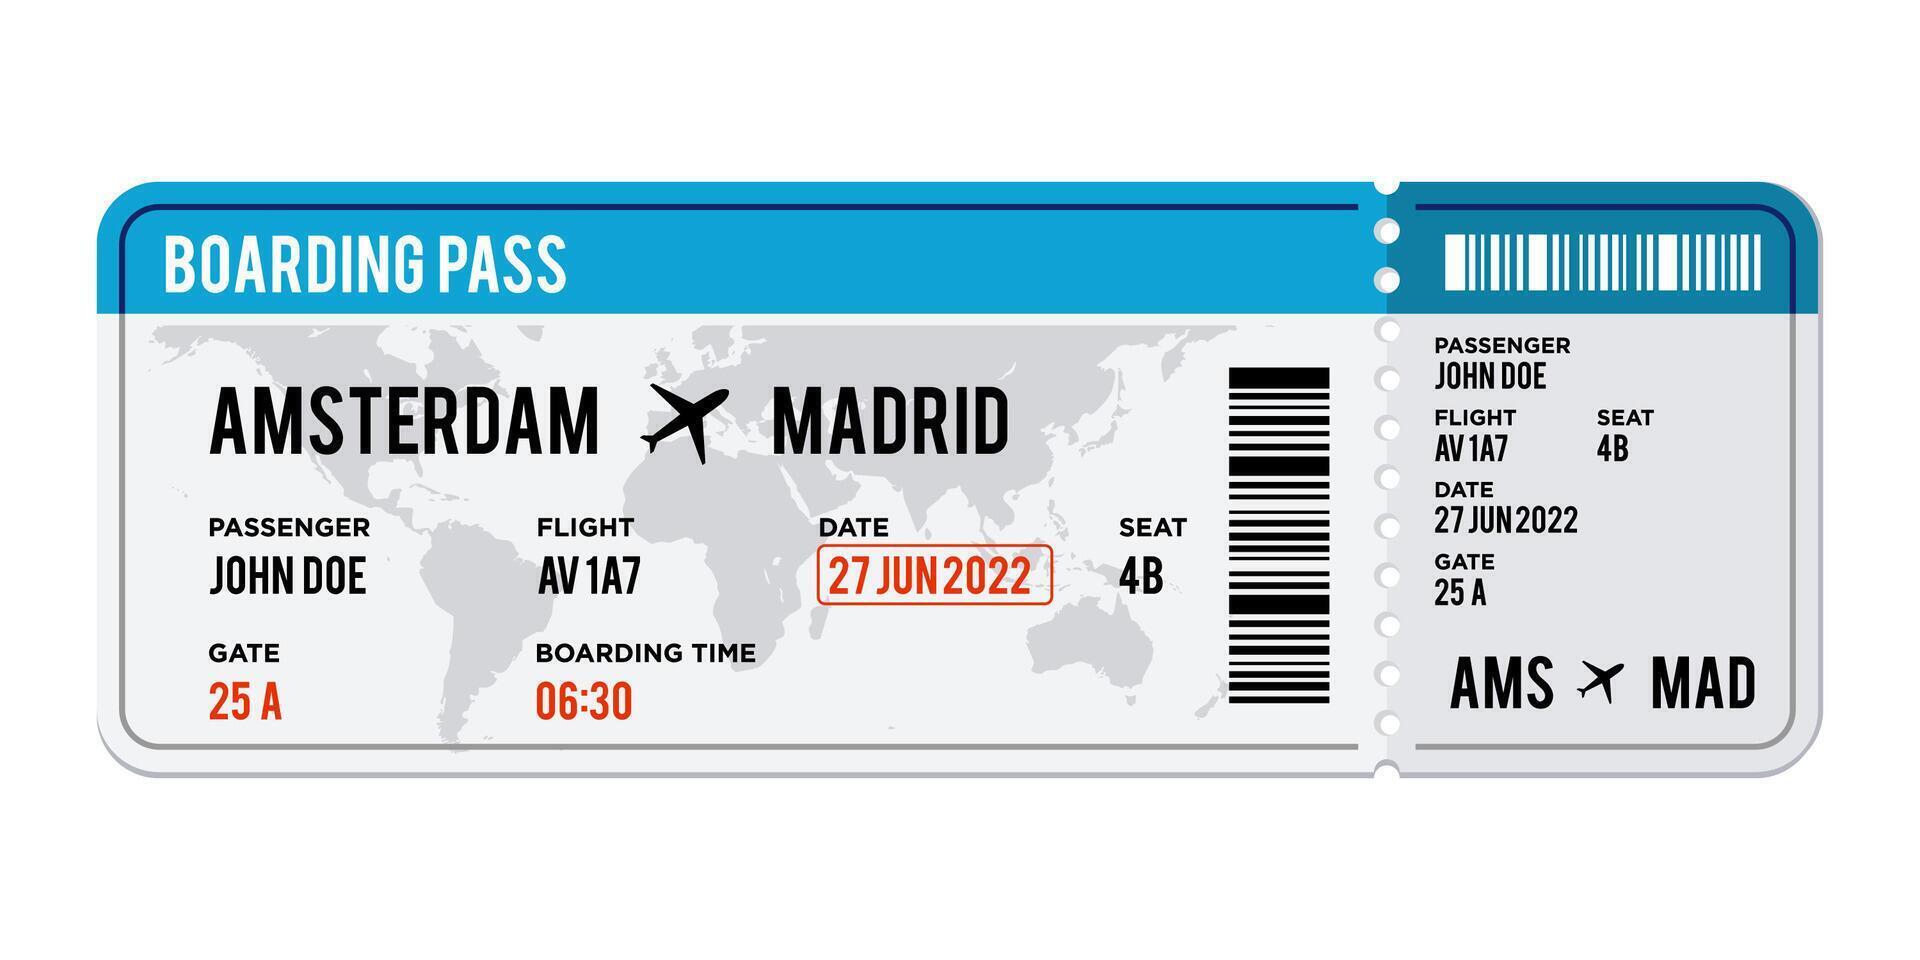 blue and white Airplane ticket design. Realistic illustration of airplane boarding pass with passenger name and destination. Concept of travel, journey or business trip. Isolated on white background vector